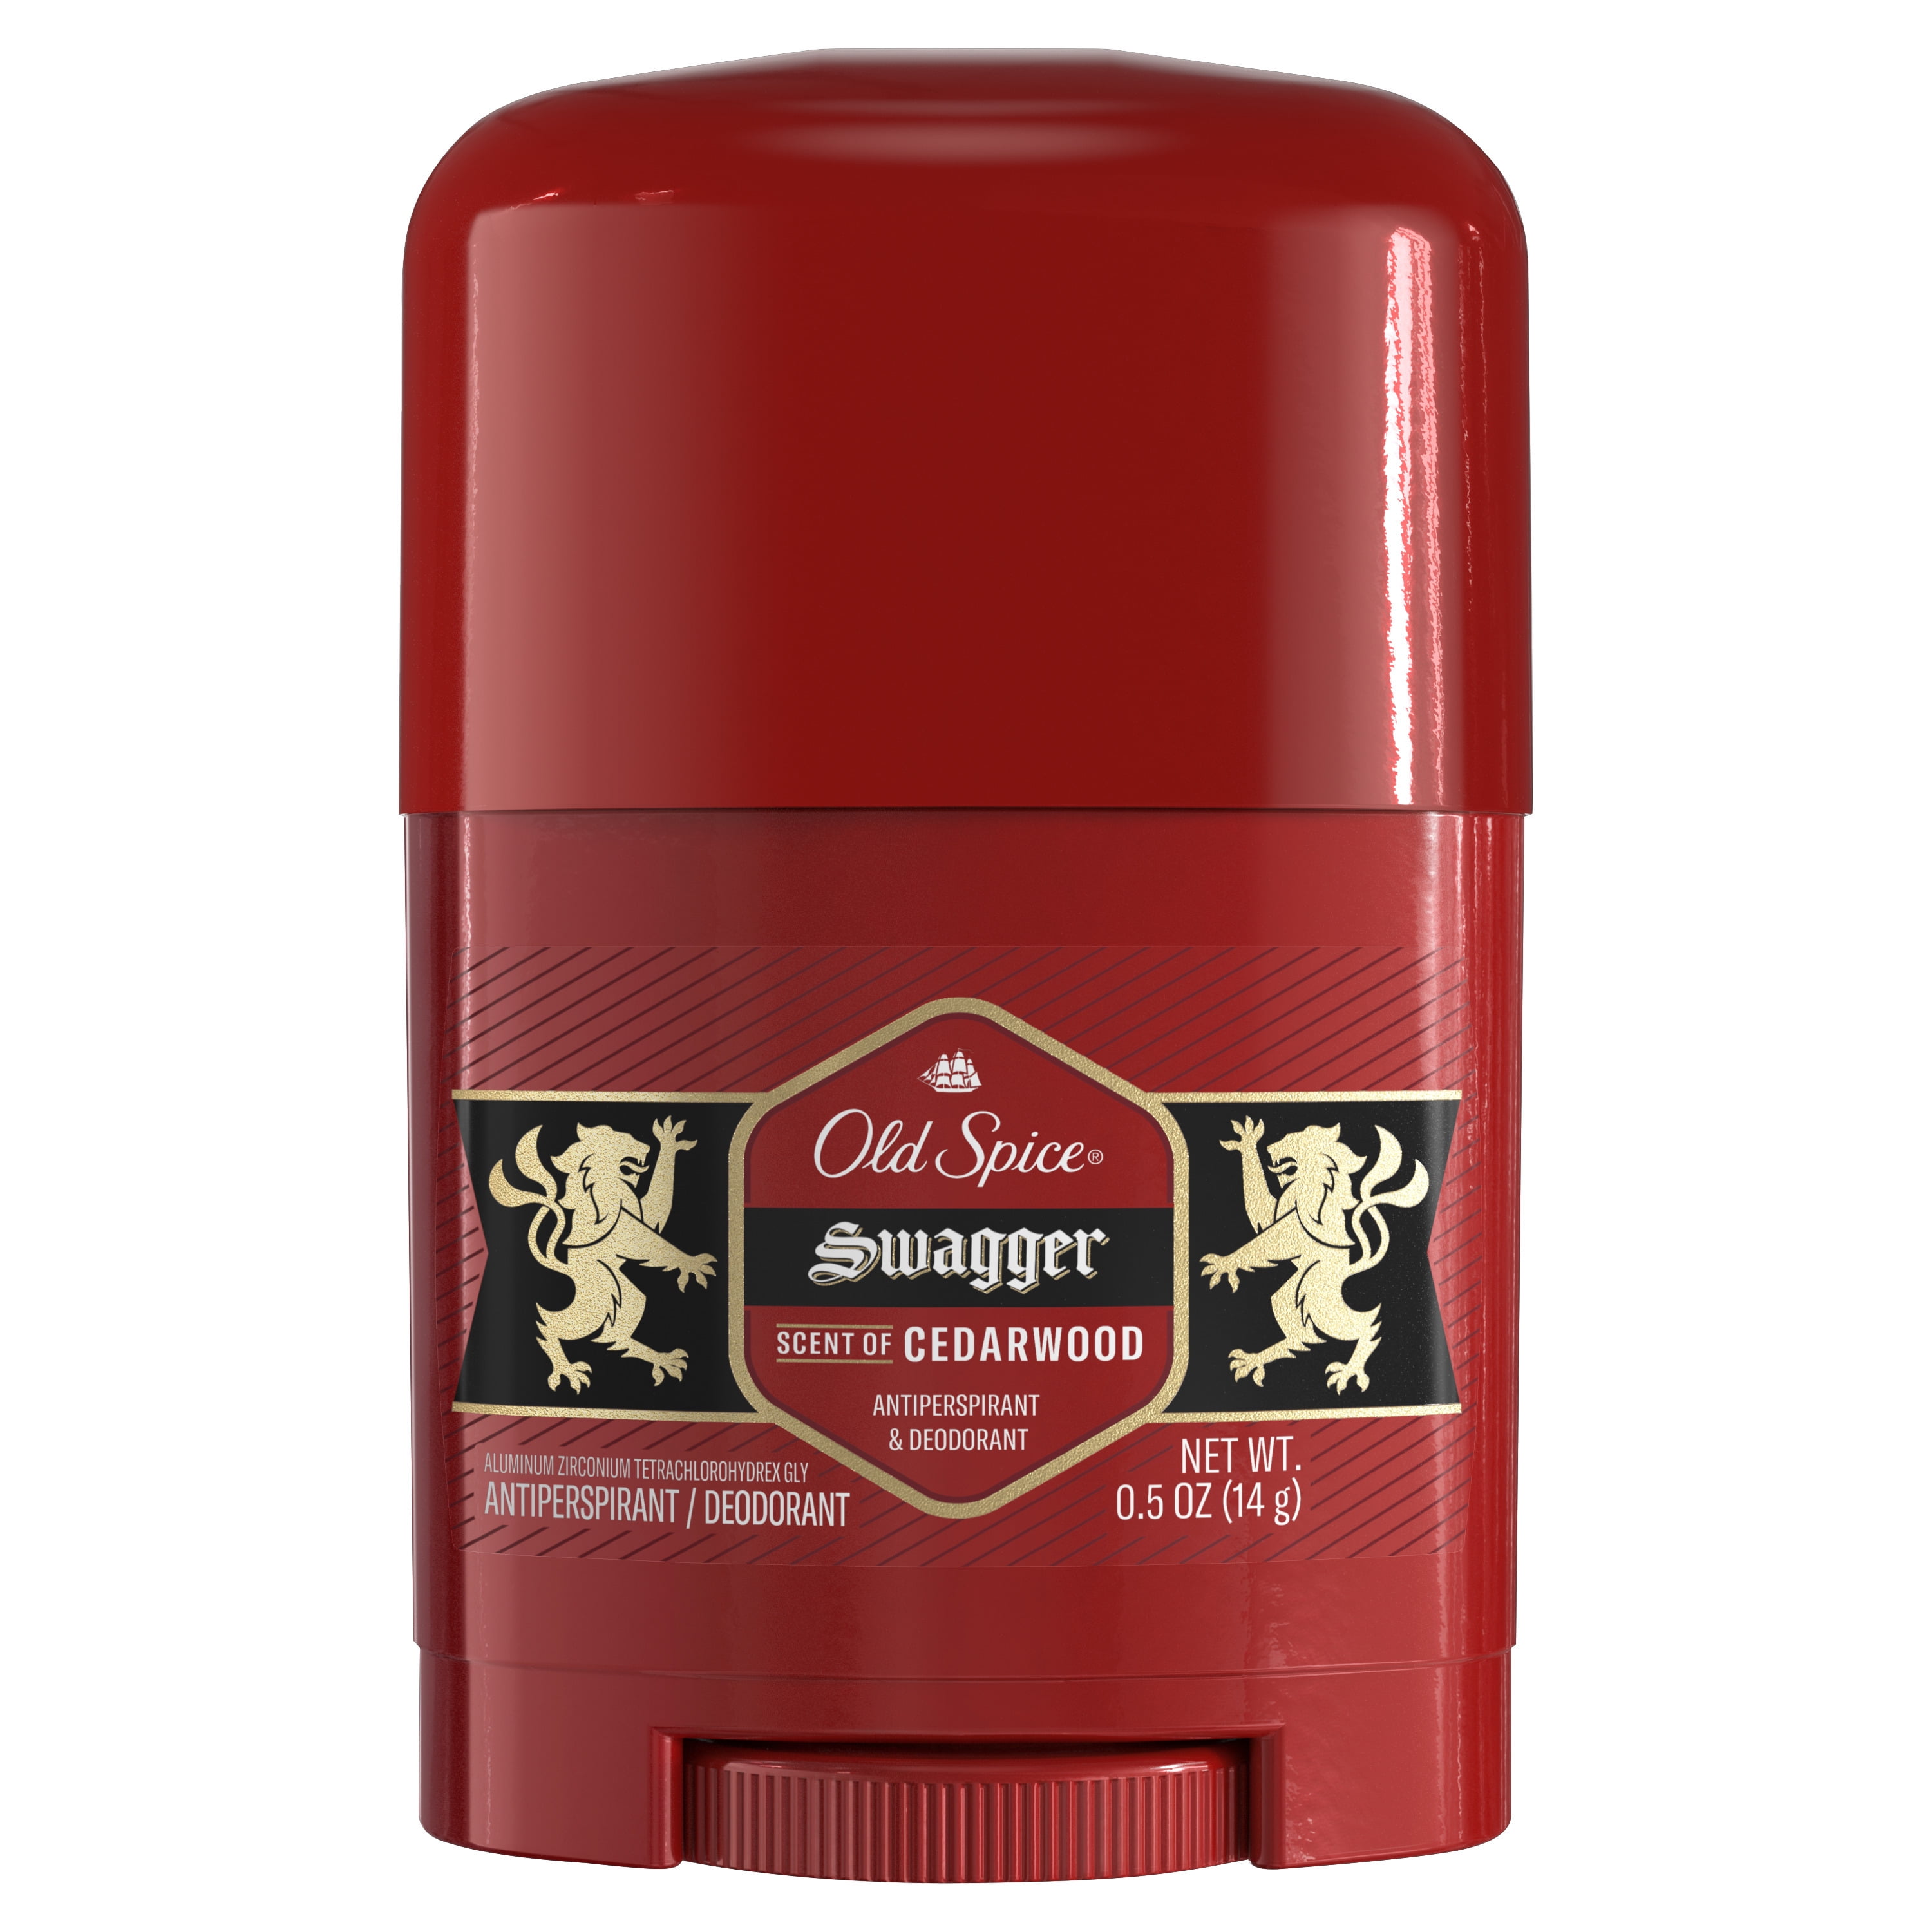 3-Count 0.5-Oz Men's Old Spice Red Collection Swagger Antiperspirant Deodorant + $5 Walmart Cash for $4.41 (Select Walmart Stores for Pickup / YMMV)